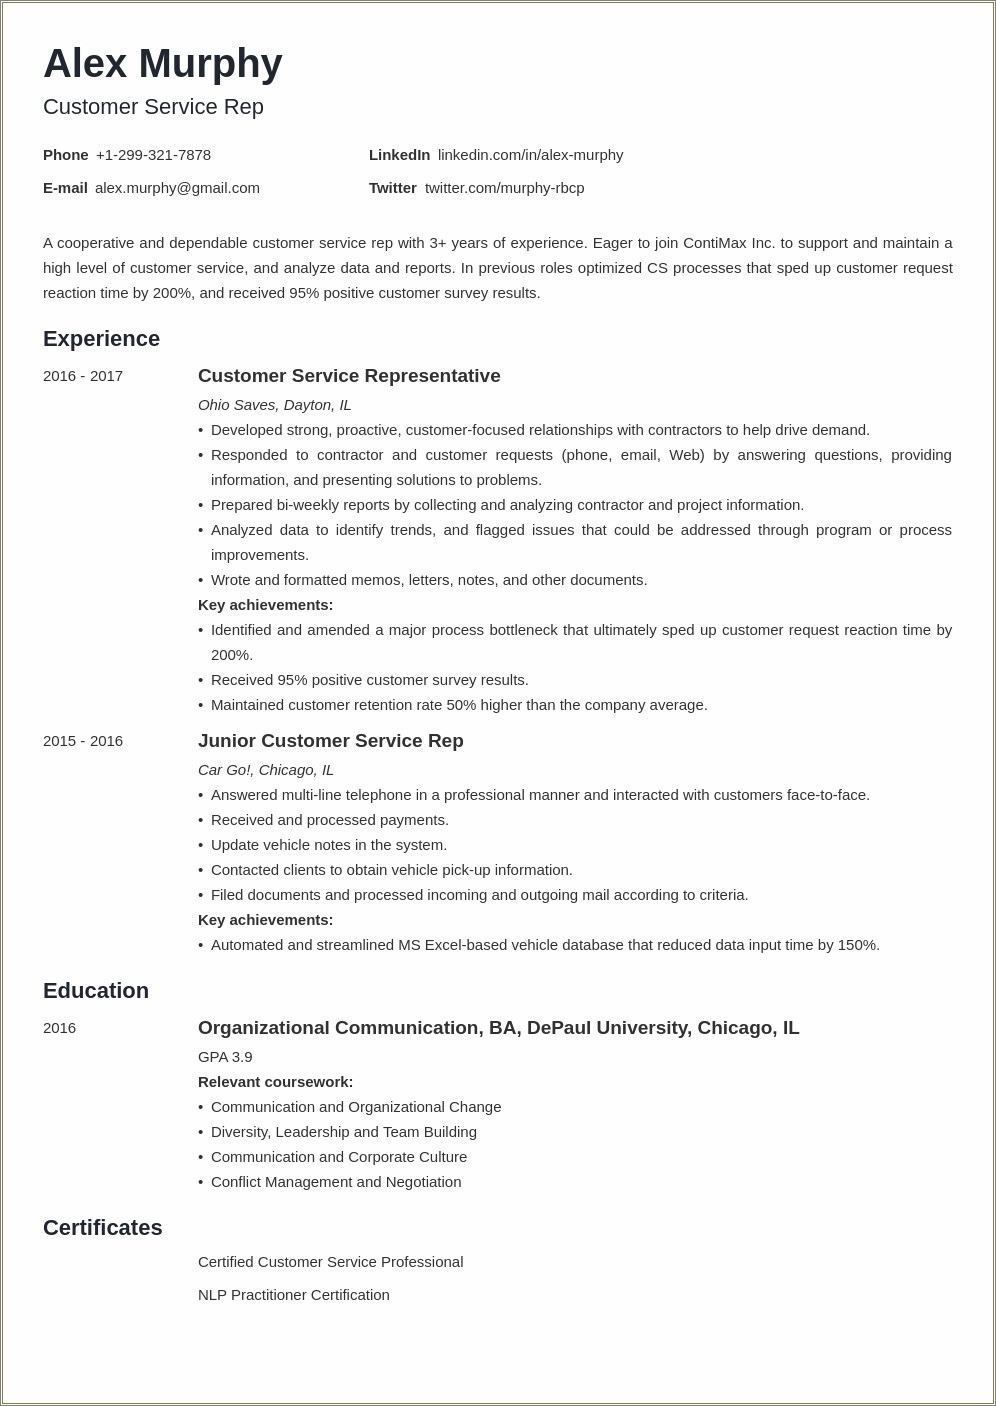 Where To Put Relevant Coursework In A Resume